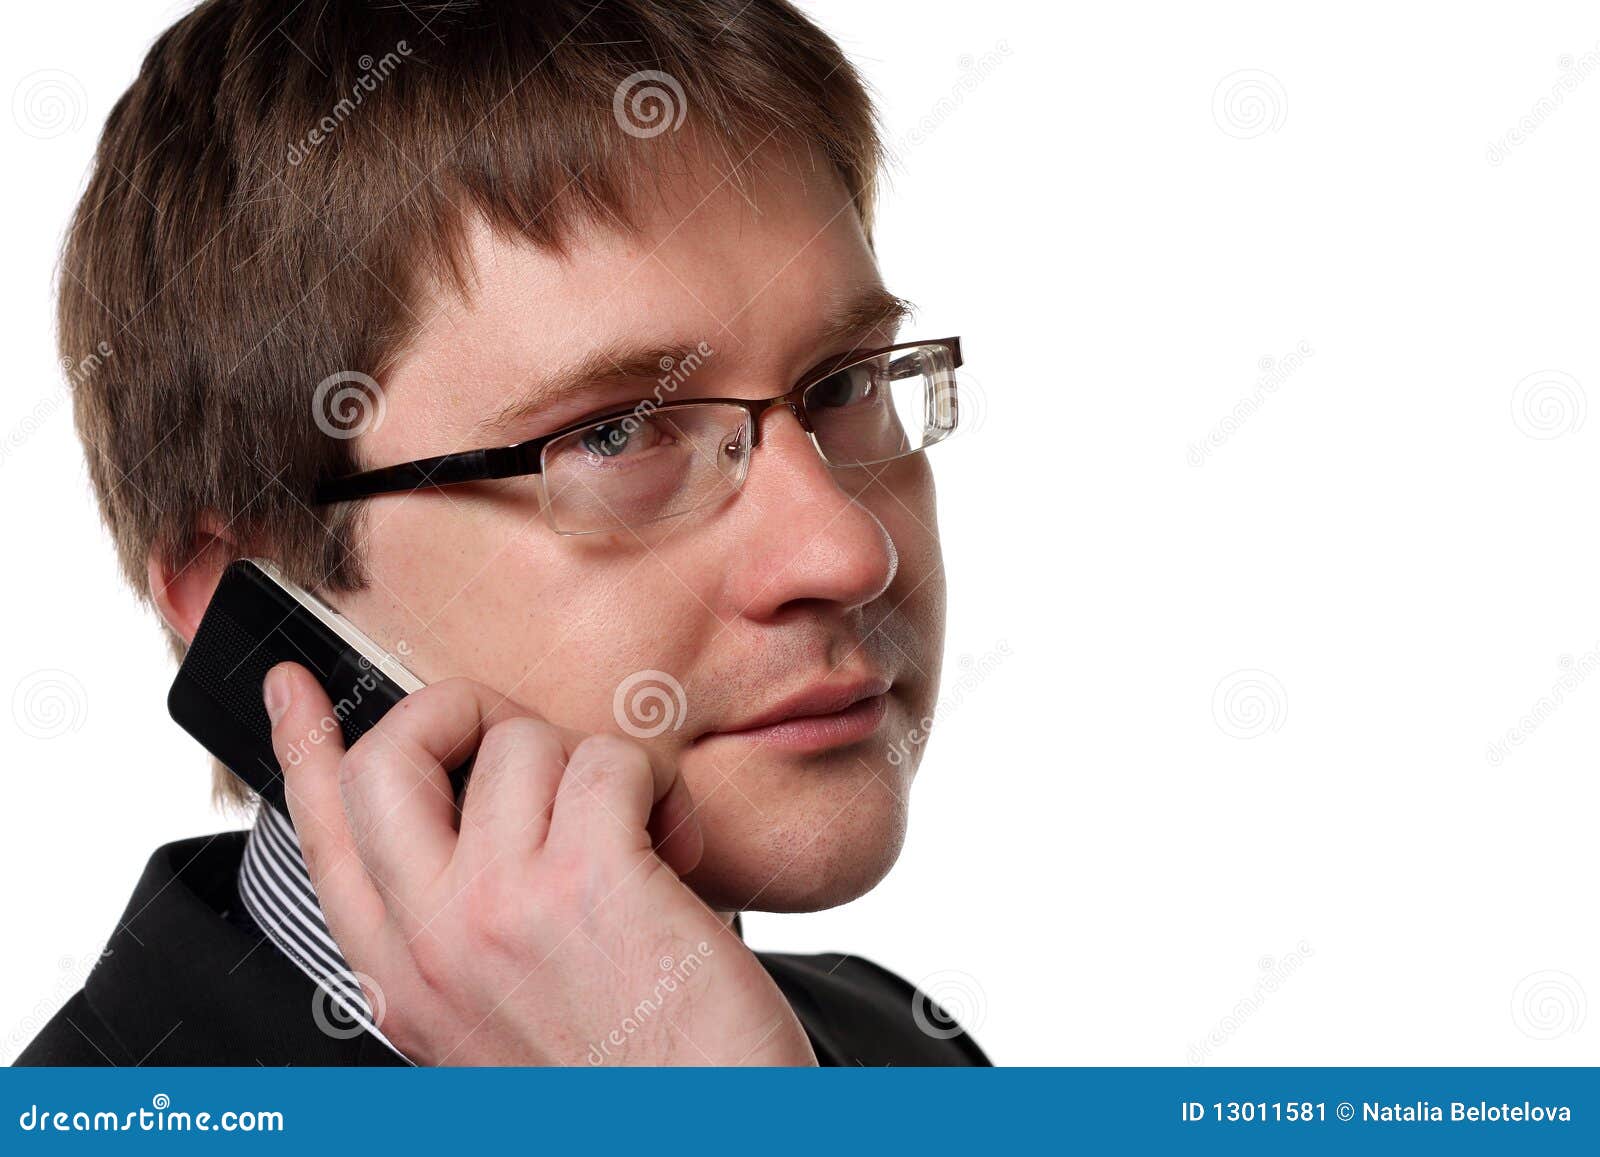  A man with short brown hair and glasses is talking on the phone.